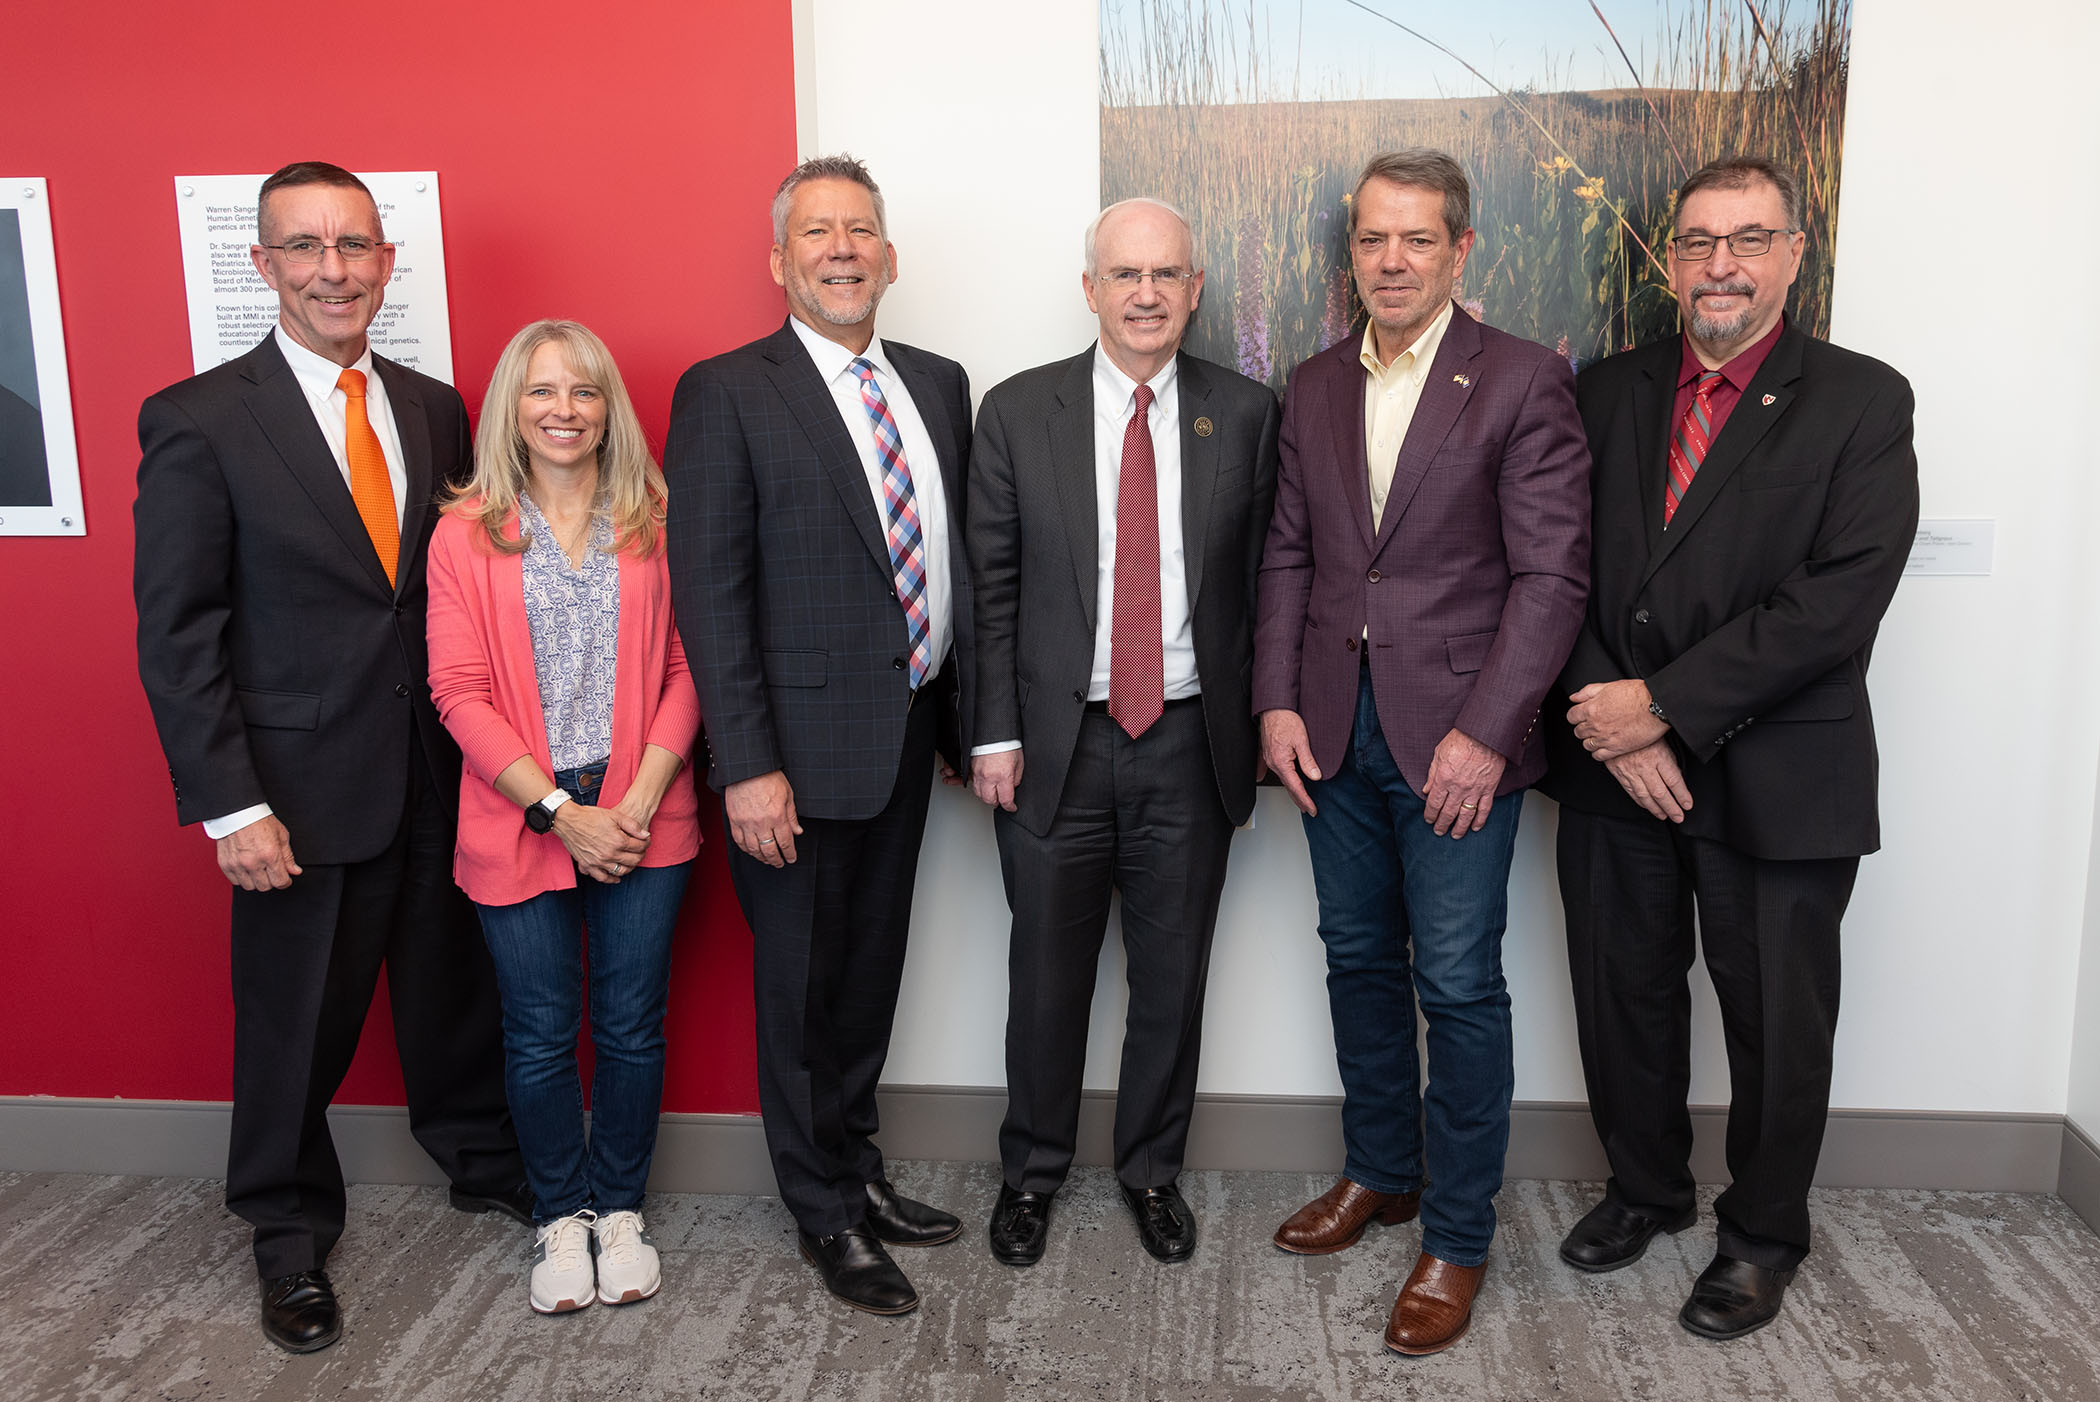 From left&comma; Steve Corsi&comma; PsyD&comma; CEO of Nebraska Department of Health and Human Services&semi; Rachelle Main&comma; a parent receiving support through the Family Support Waiver program&semi; Tony Green&comma; director of the DHHS Division of Developmental Disabilities&semi; Jeffrey P&period; Gold&comma; MD&comma; UNMC chancellor&semi; Gov&period; Jim Pillen&semi; and Karoly Mirnics&comma; MD&comma; PhD&comma; director of the Munroe-Meyer Institute